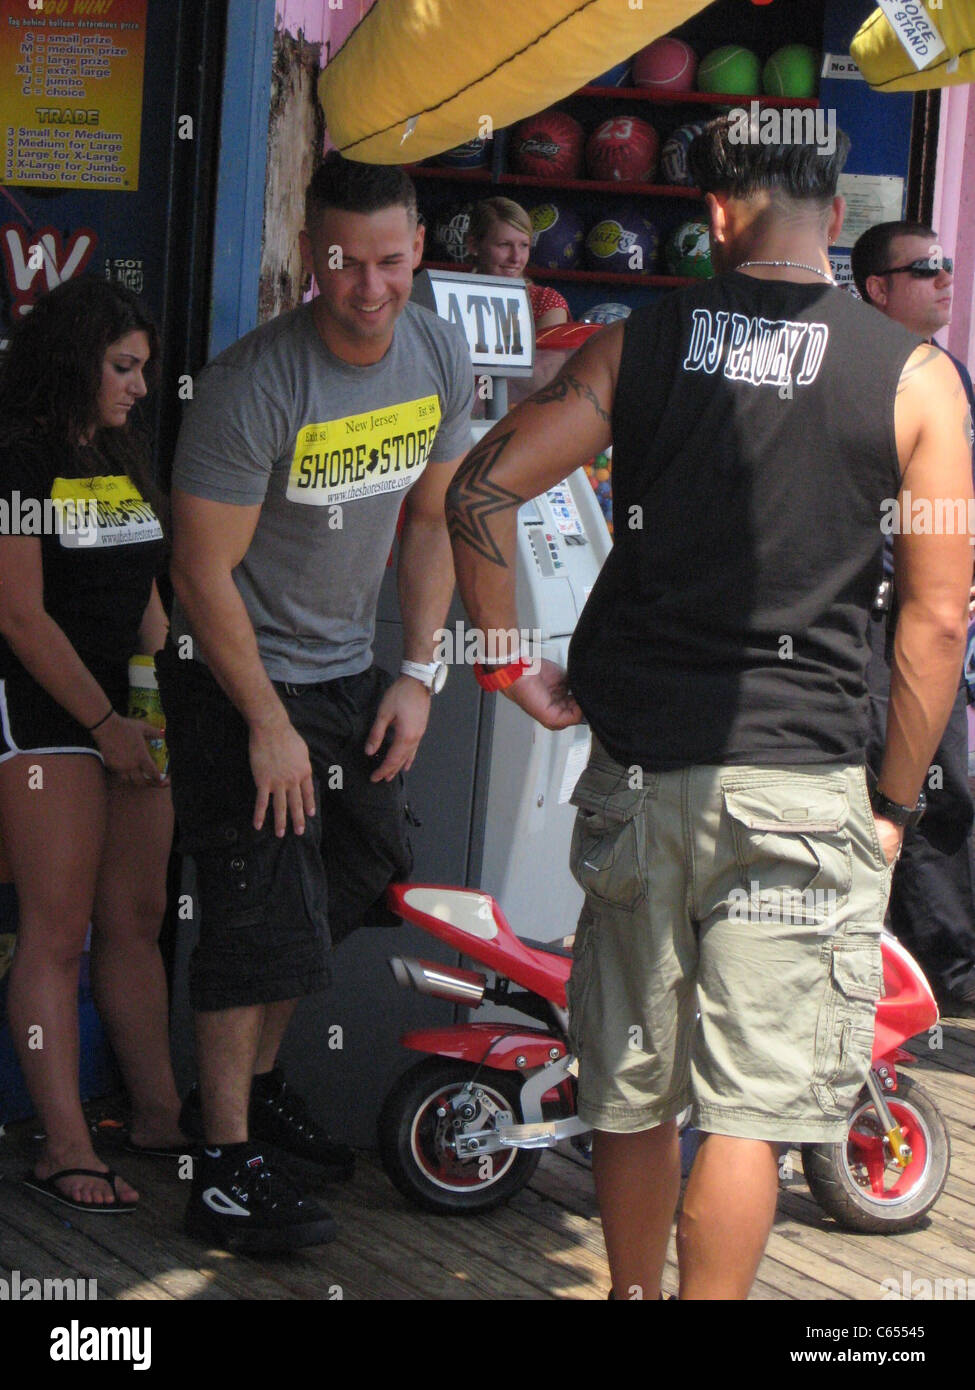 Paul Delvecchio, aka DJ Pauly D, Deena Nicole Cortese, Michael Sorrentino, aka The Situation out and about for JERSEY SHORE Season Two Celebrity Candids - FRI, the boardwalk, Seaside Heights, NJ August 20, 2010. Photo By: Doug Fallone/Everett Collection Stock Photo